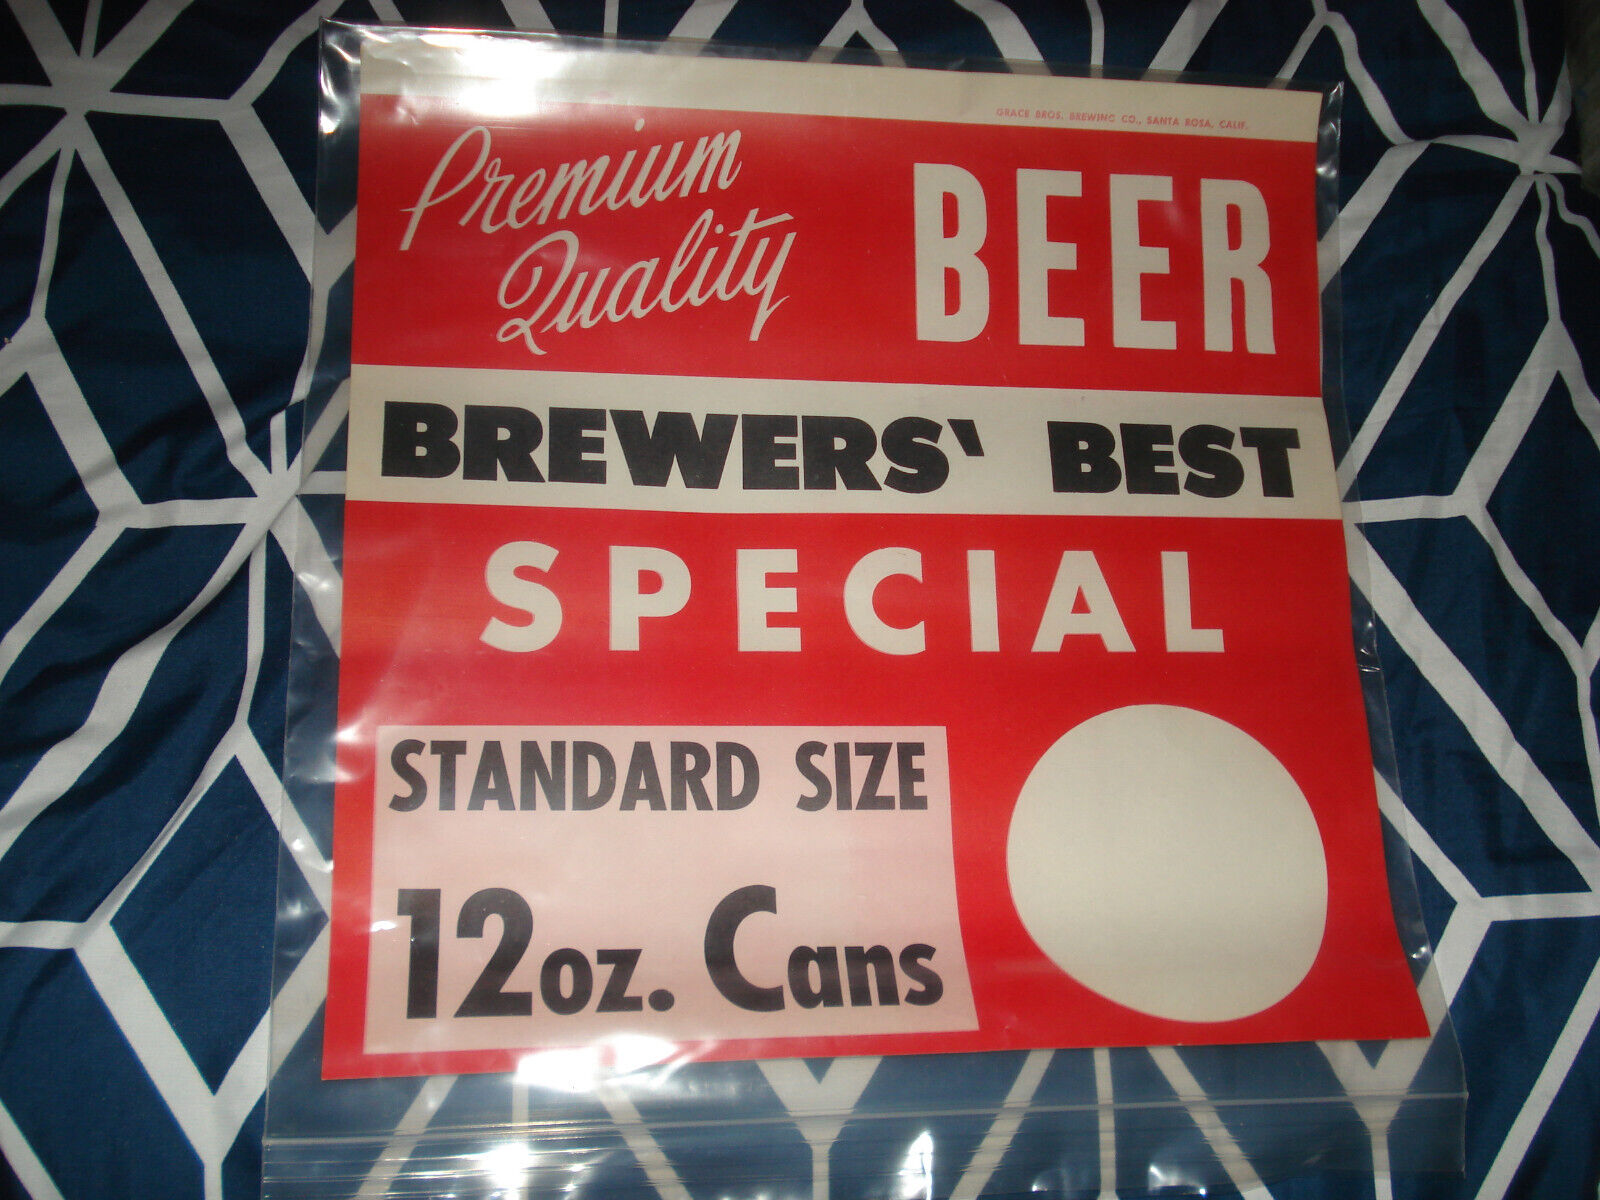 1954 Brewers Best Beer in 12oz Cans Tacker Sign Breweriana Item in Great Cond.